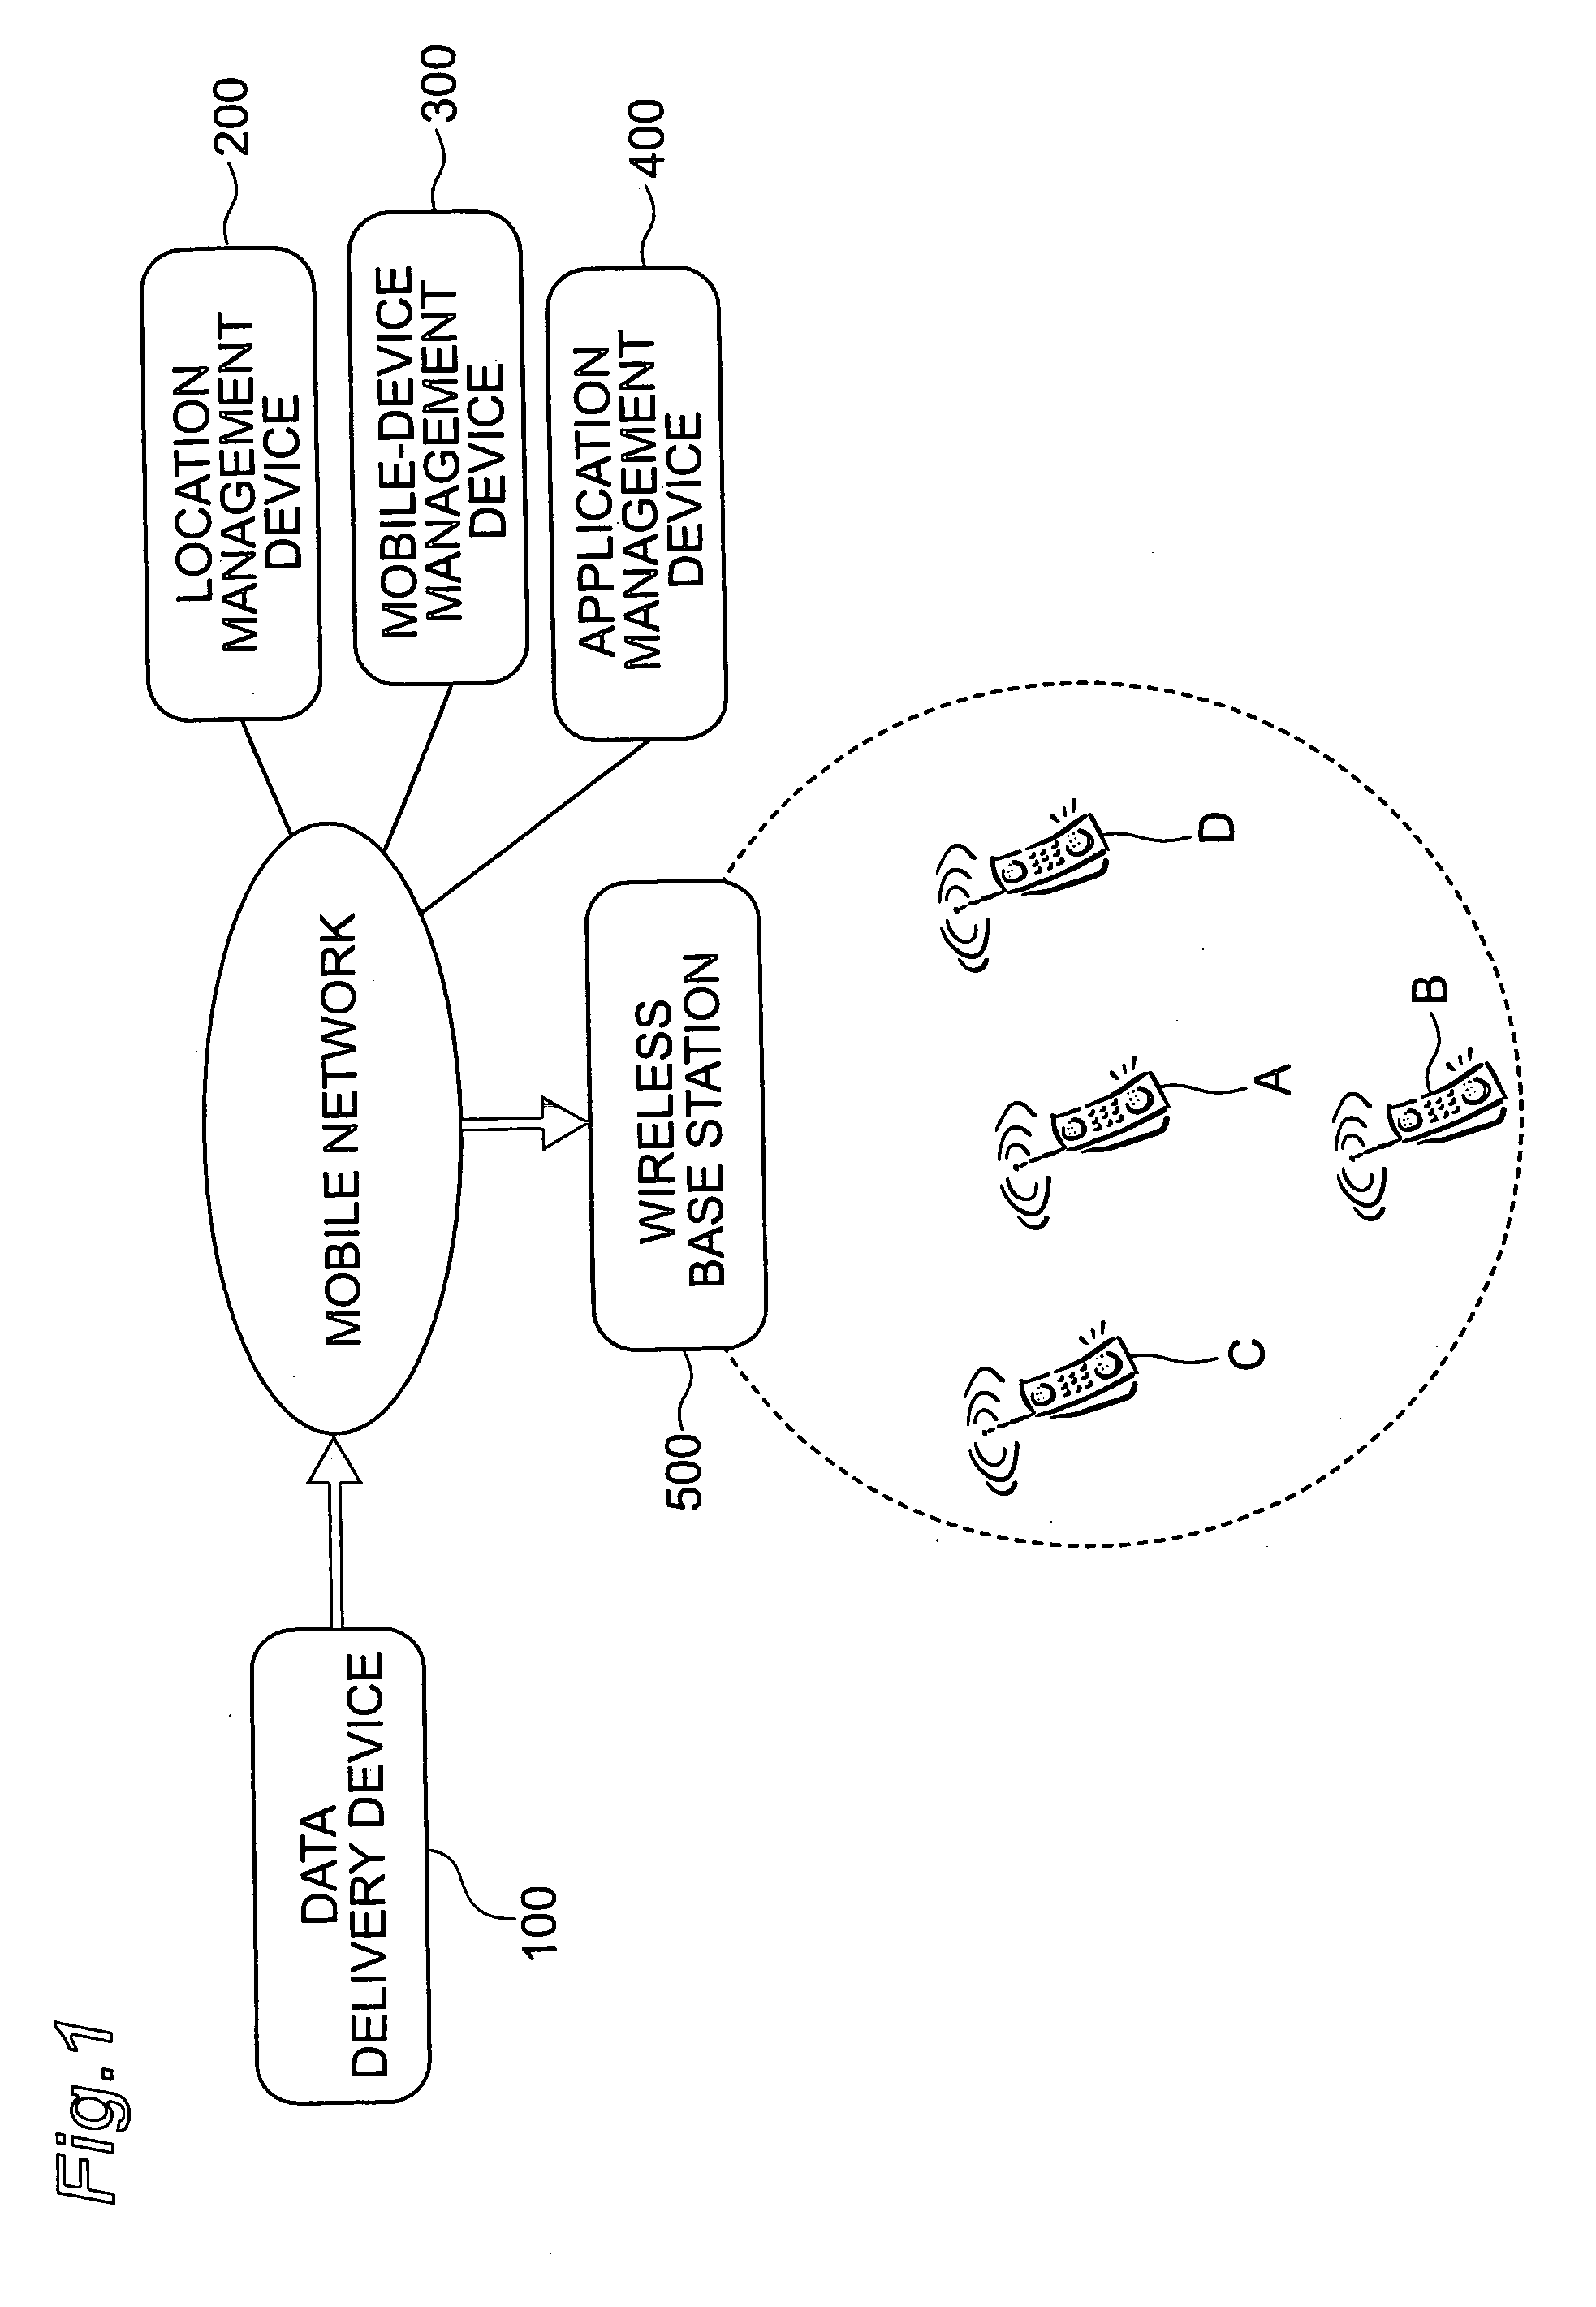 Data delivery device